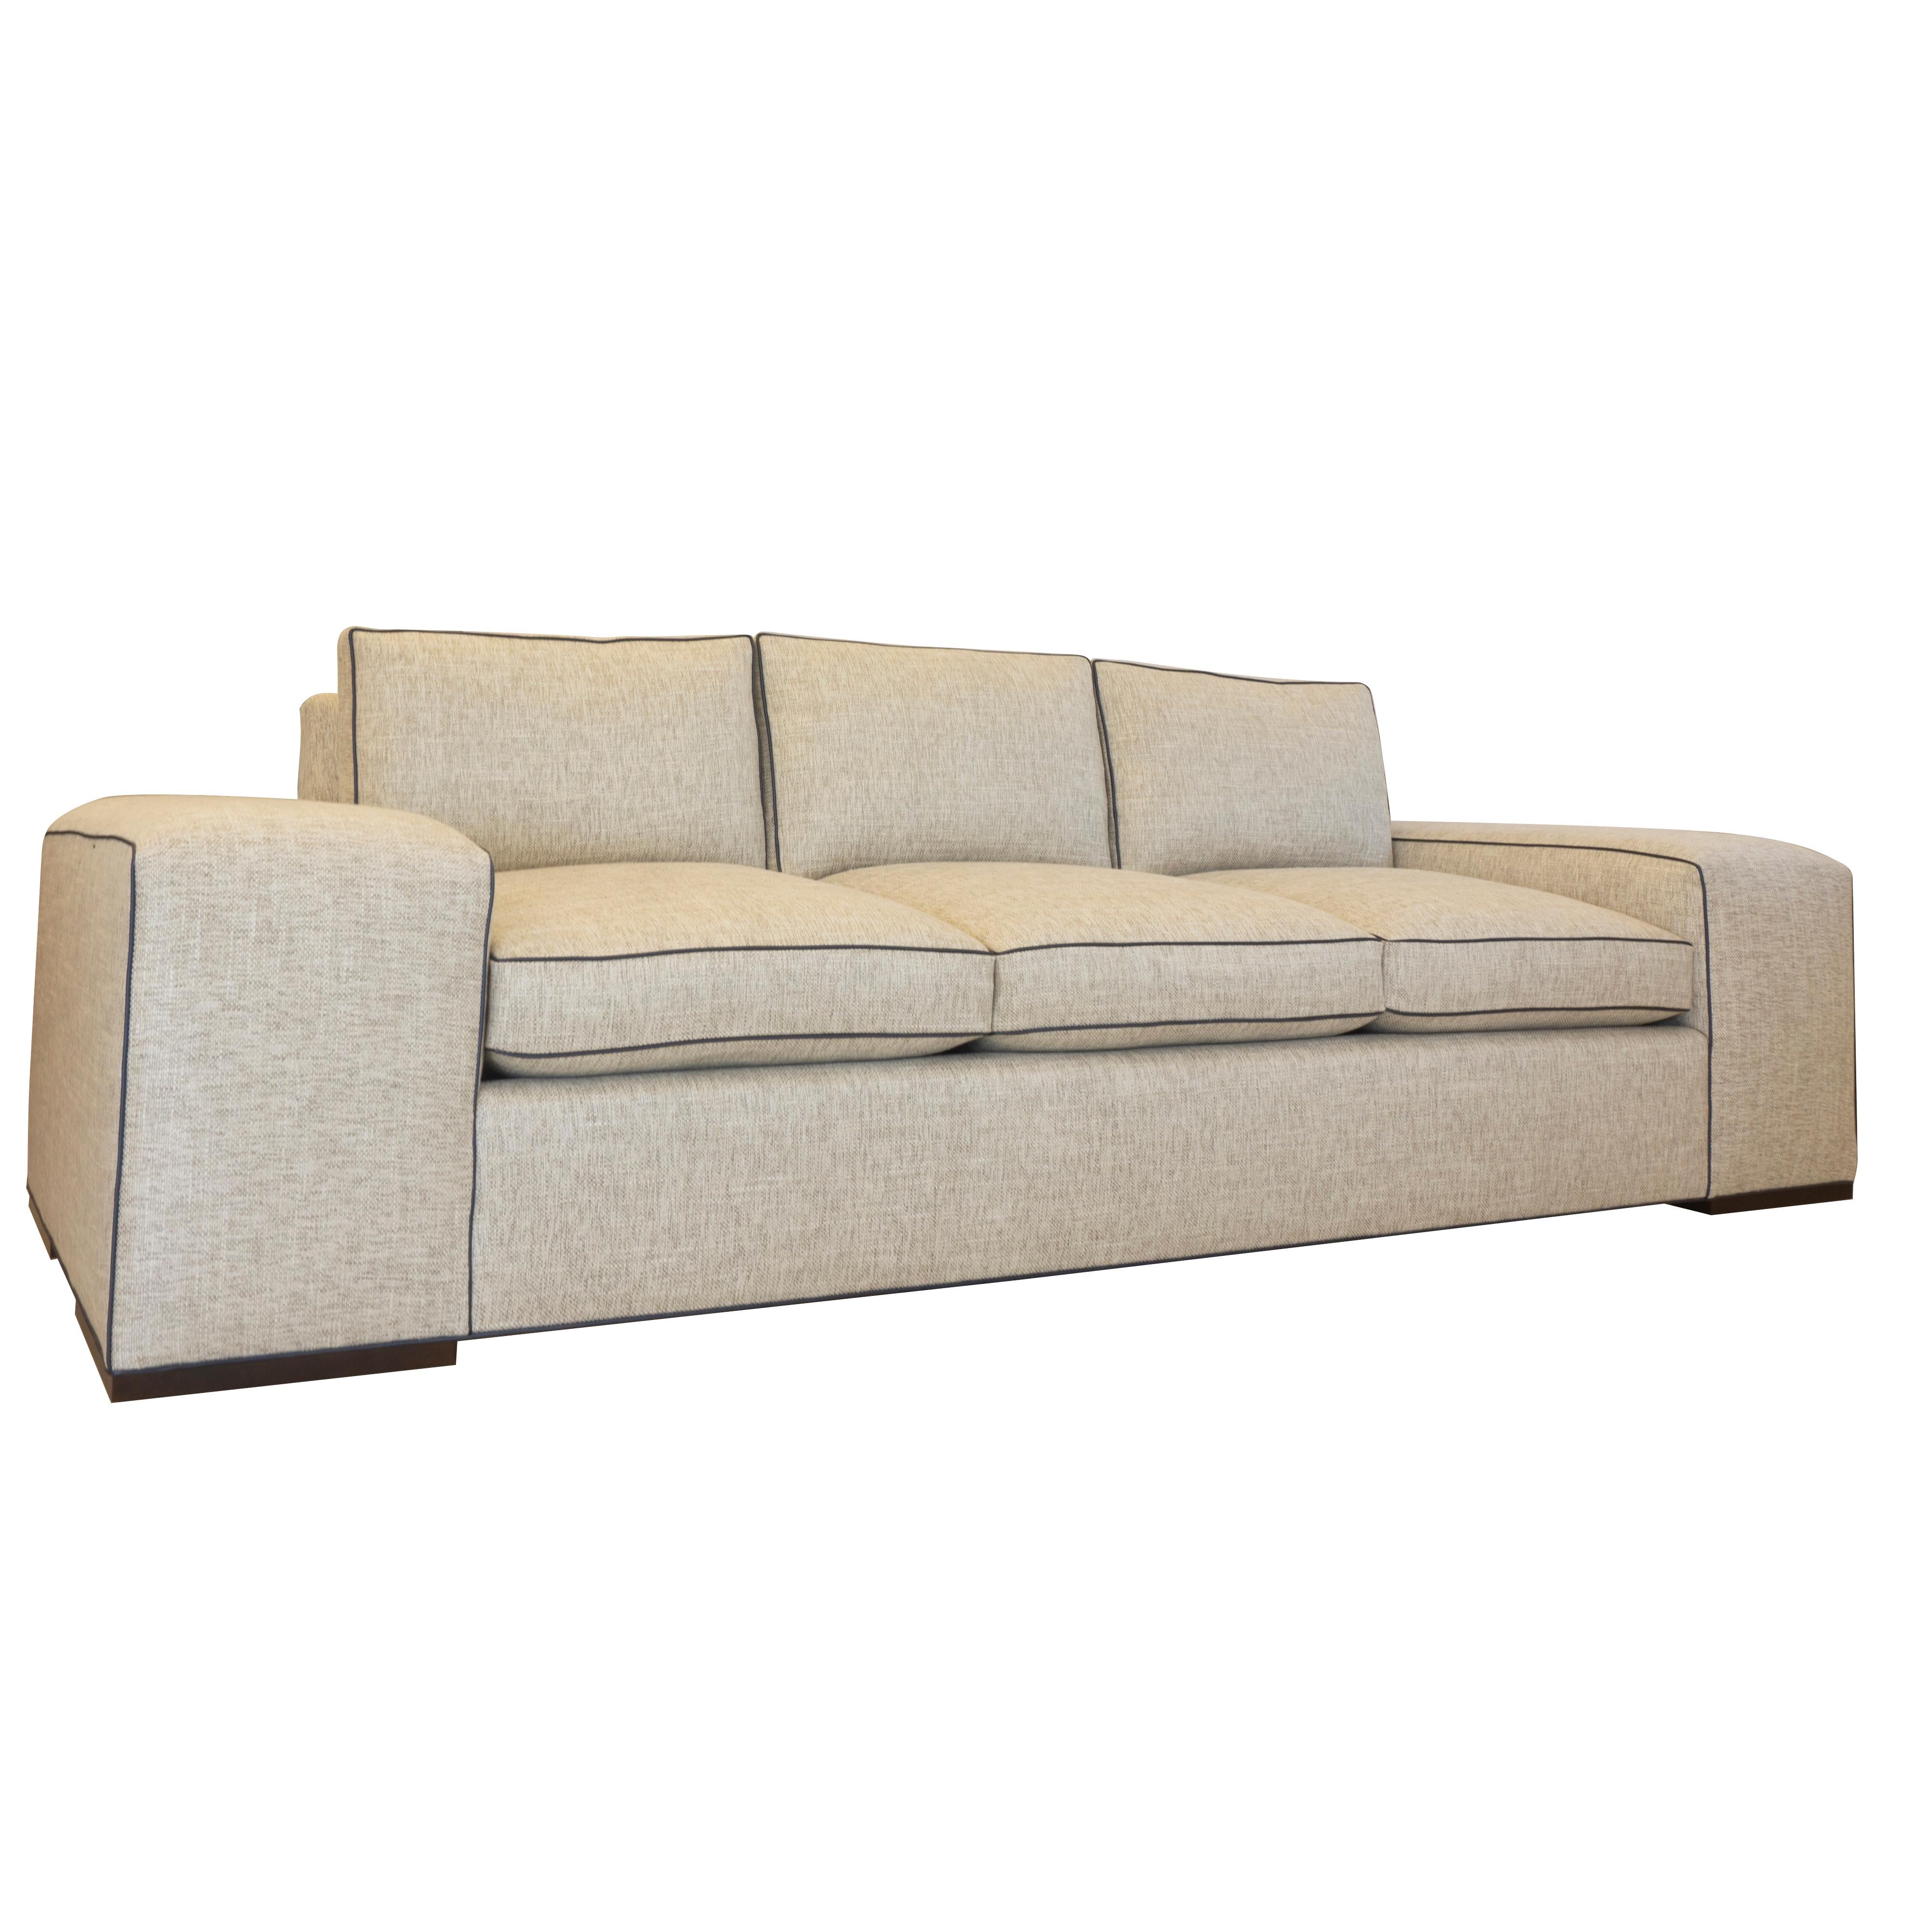 sofa with wide flat arms